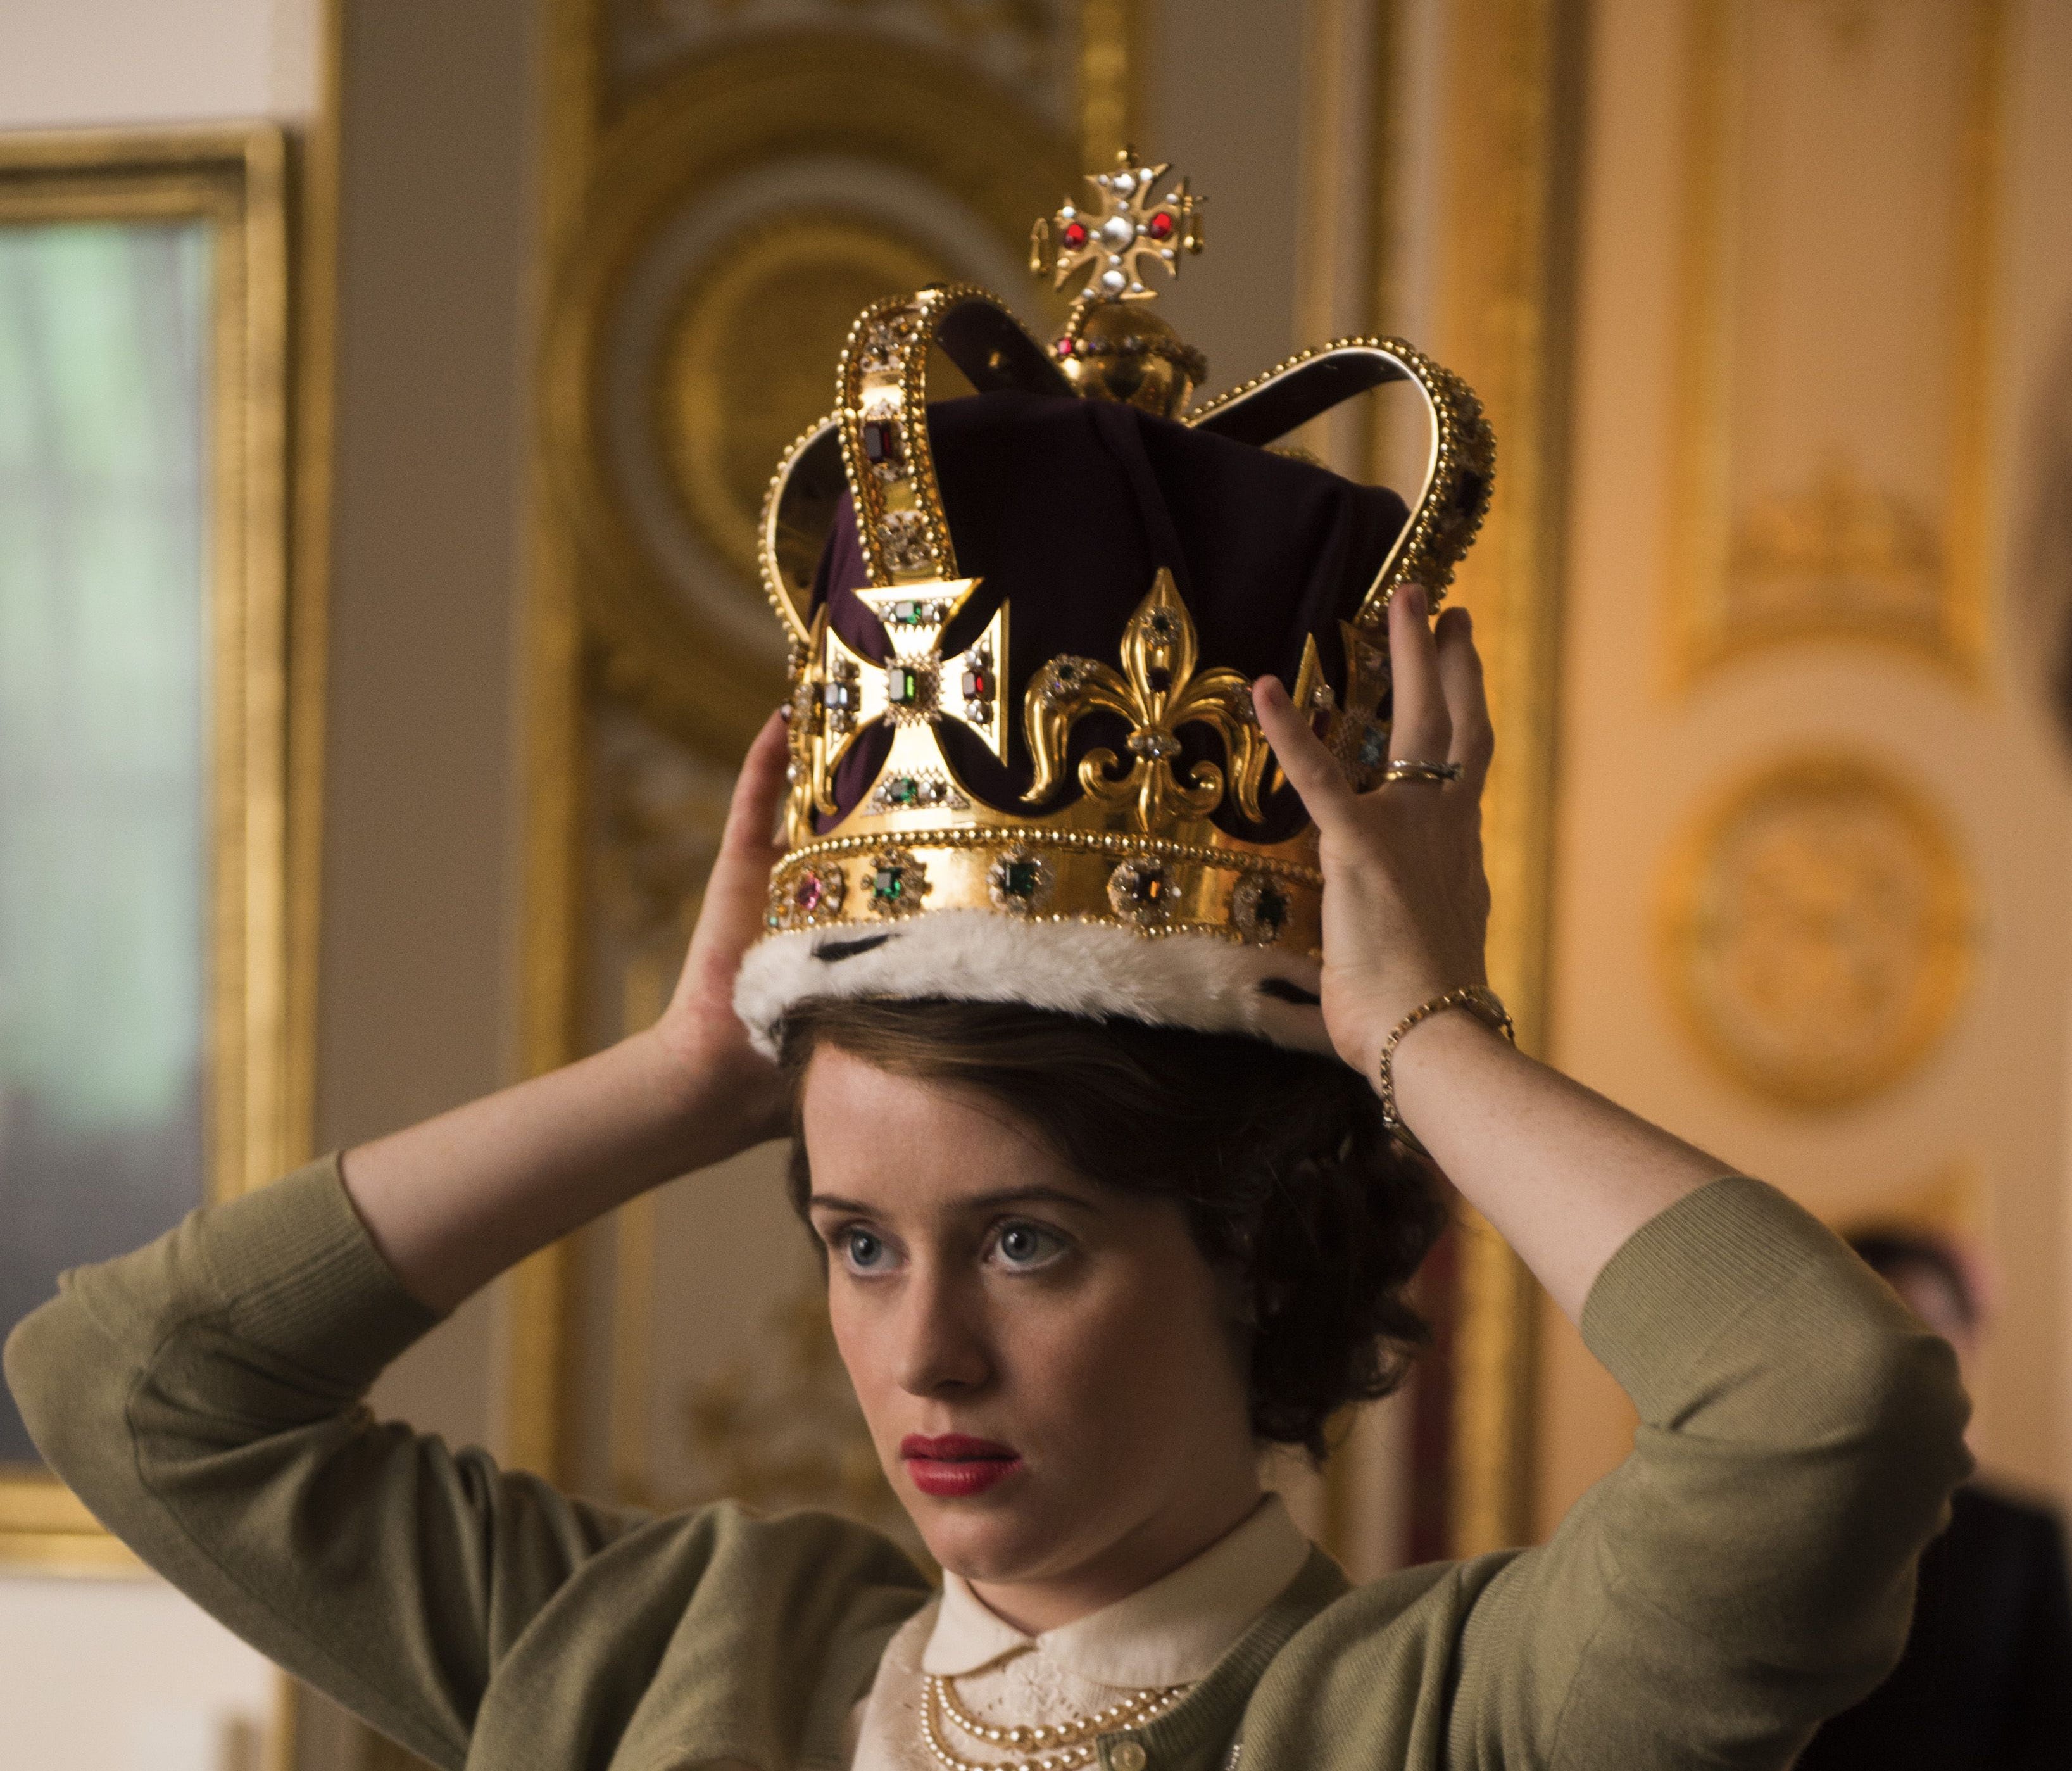 Netflix's 'The Crown' is one of the freshman drama series nominees.